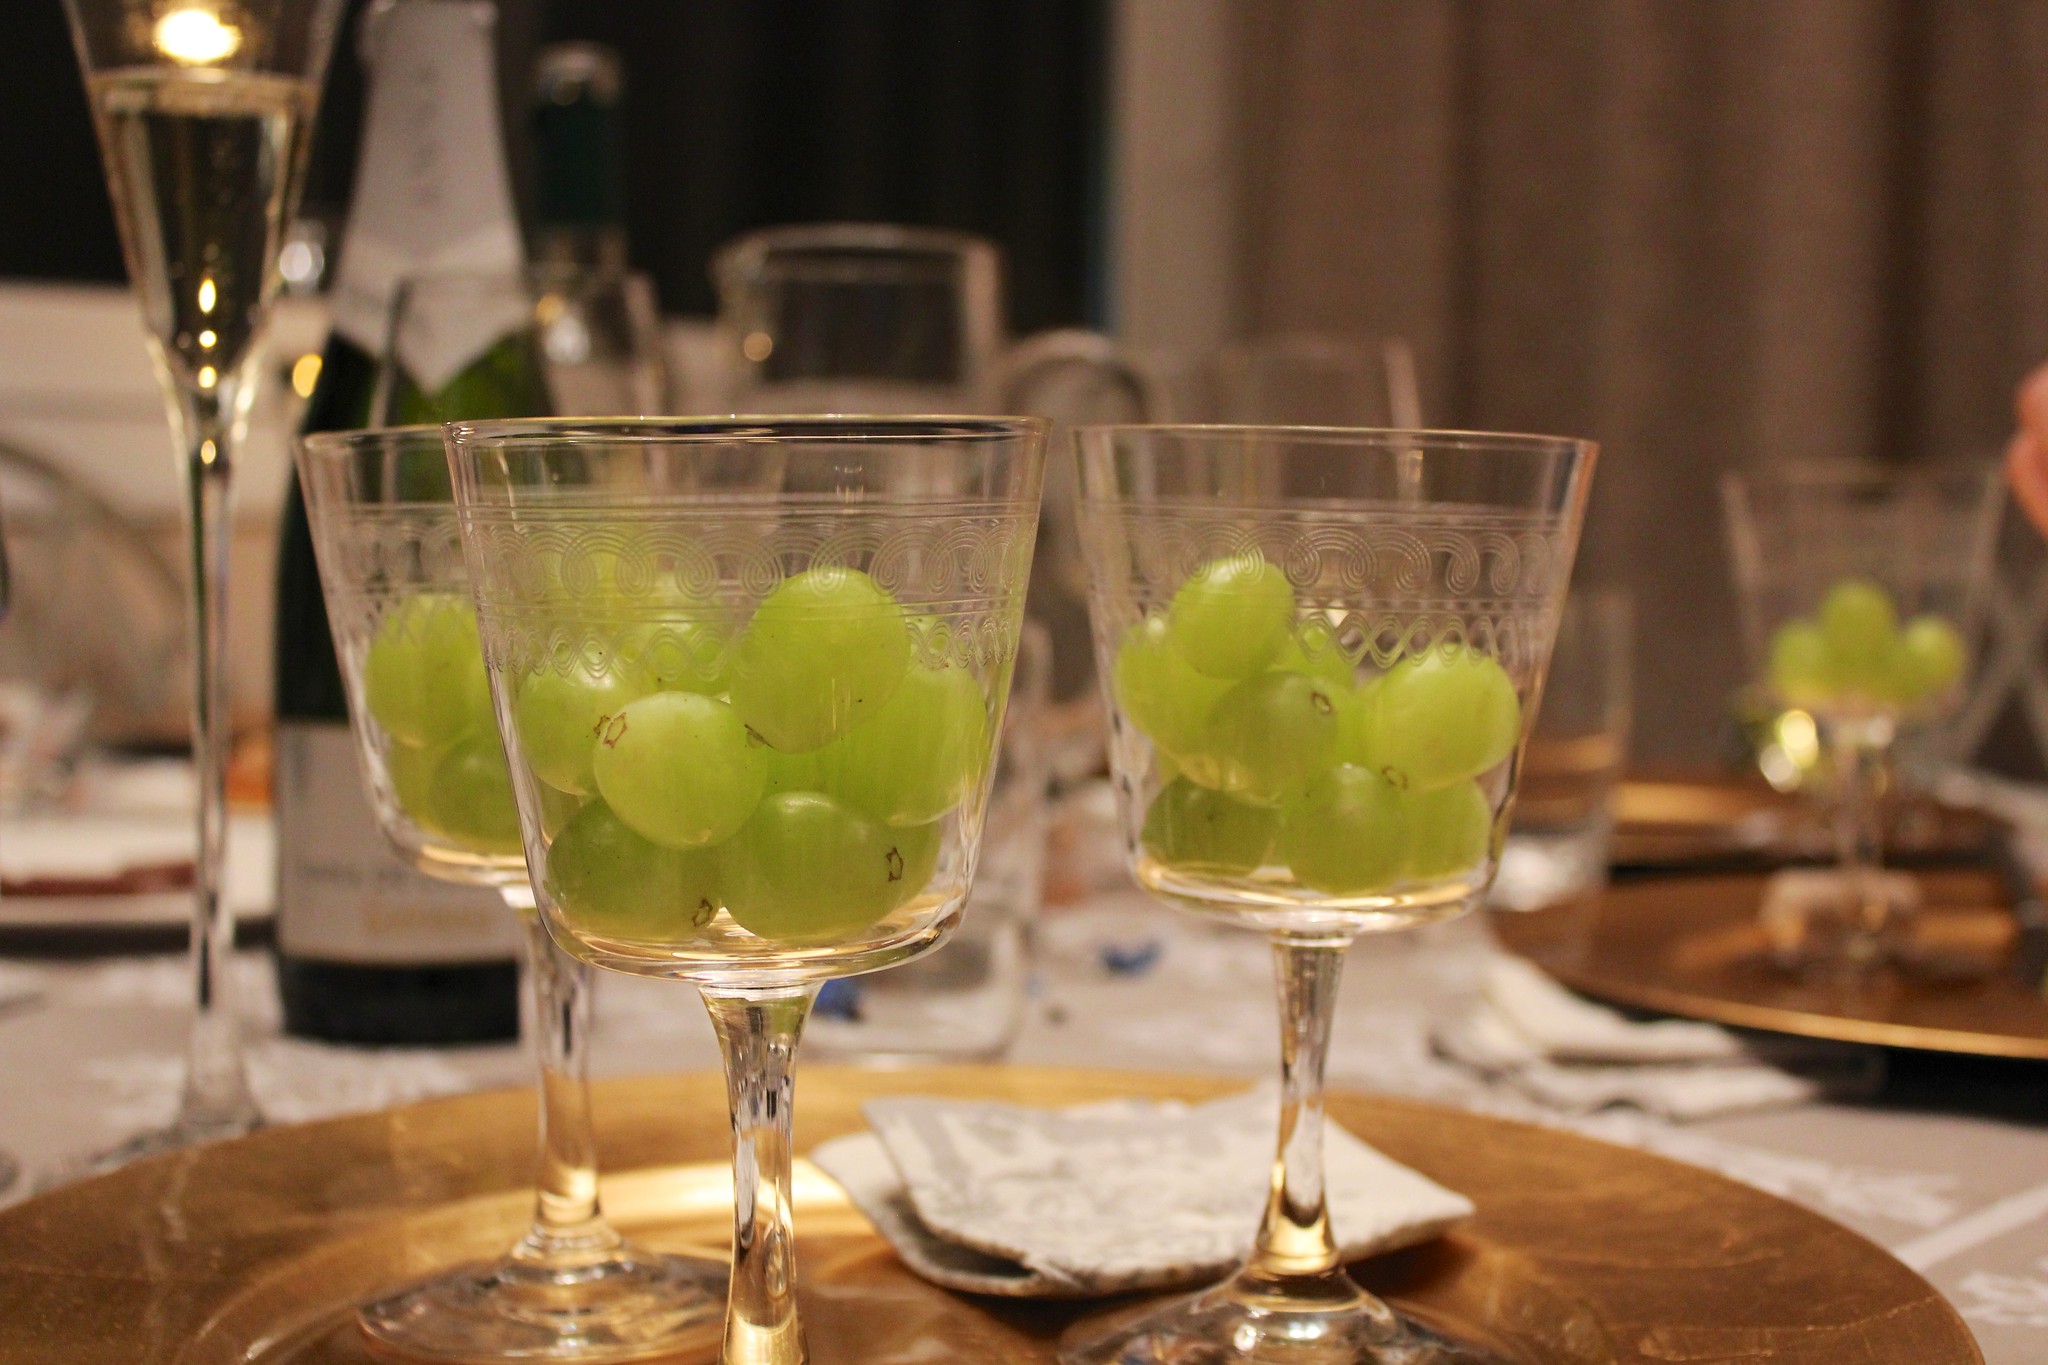 Wine glasses filled with 12 grapes at a place setting with cava in Spain on new year's eve